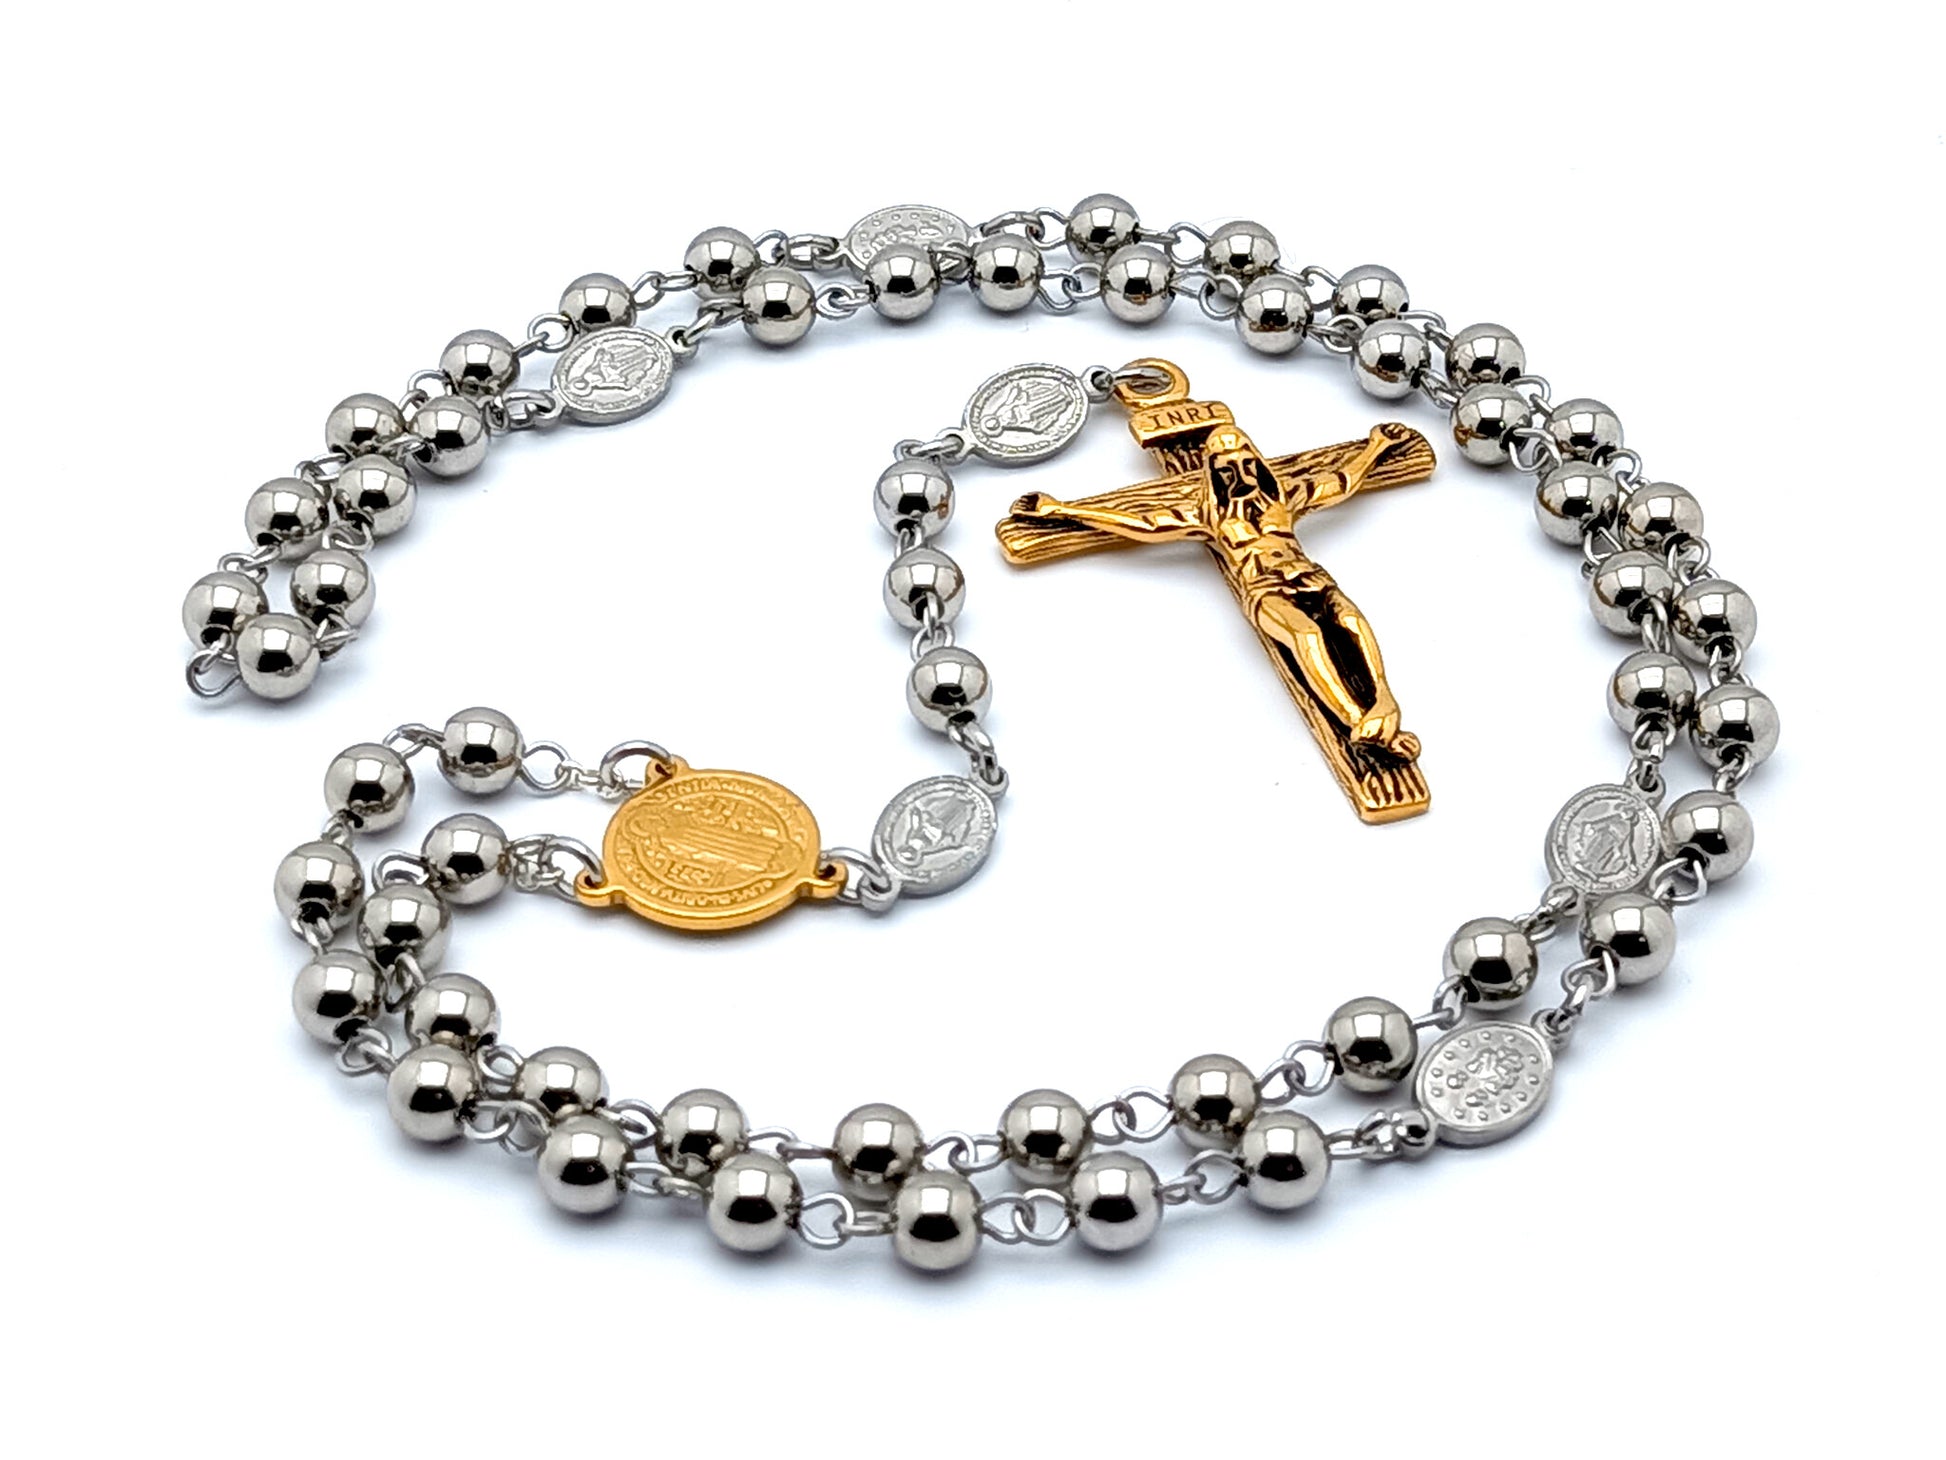 Saint Benedict unique rosary beads with gold plated medal and stainless steel beads and gold plated stainless steel crucifix.